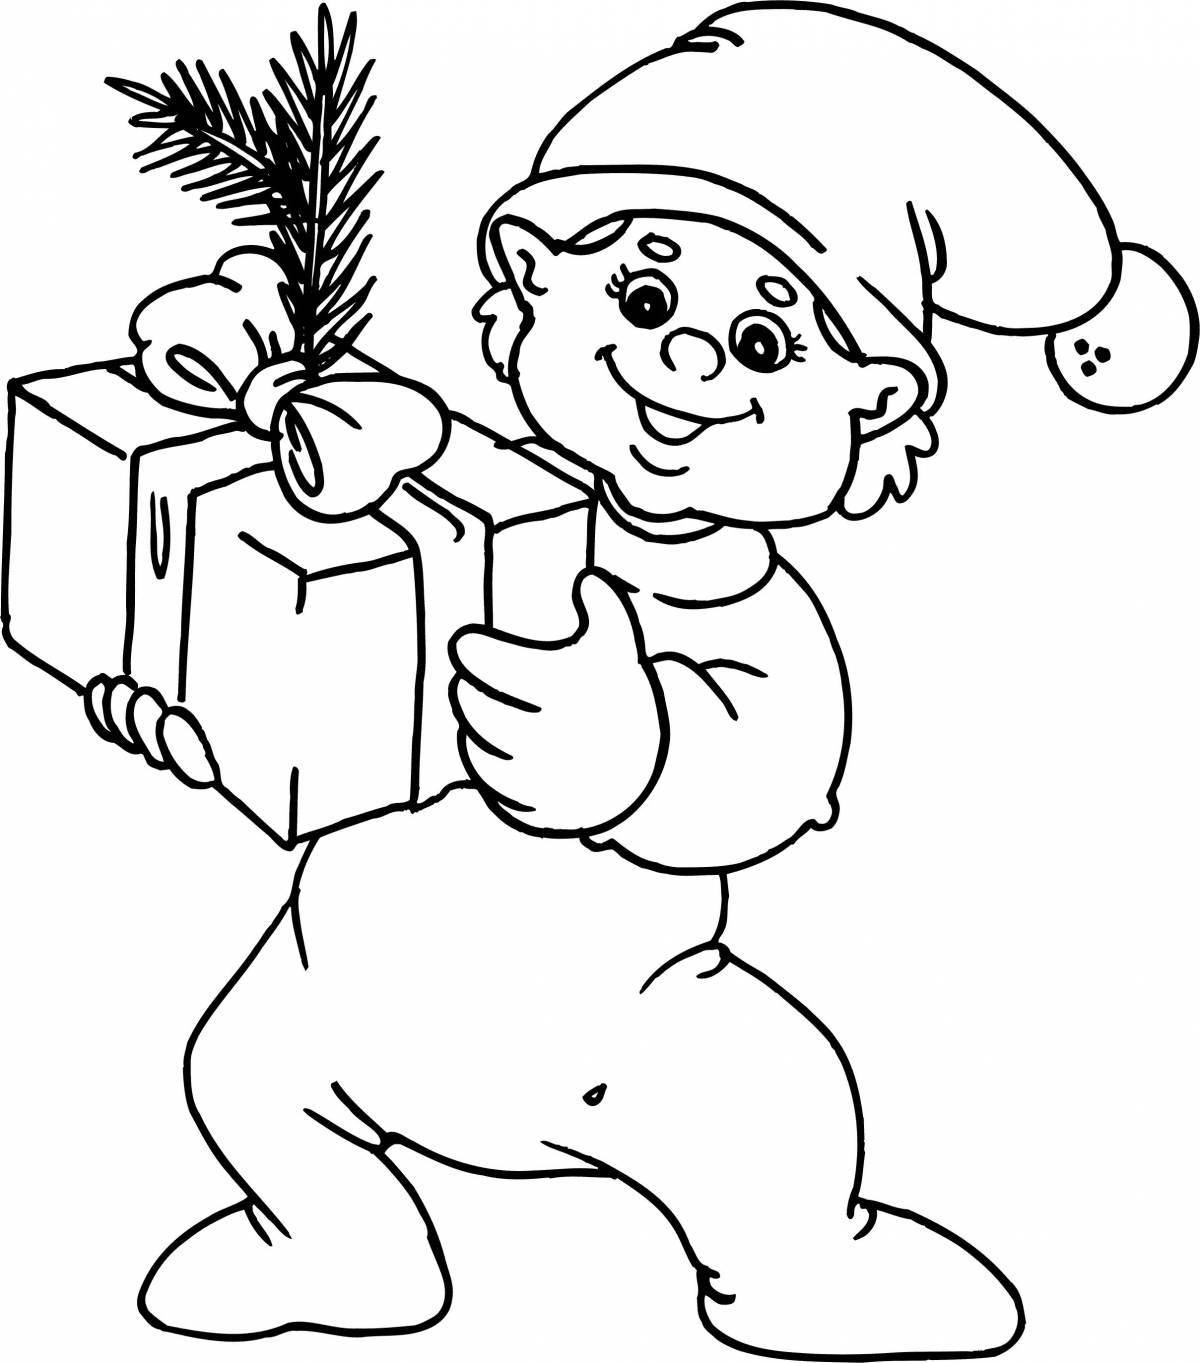 Amazing Christmas coloring book for boys